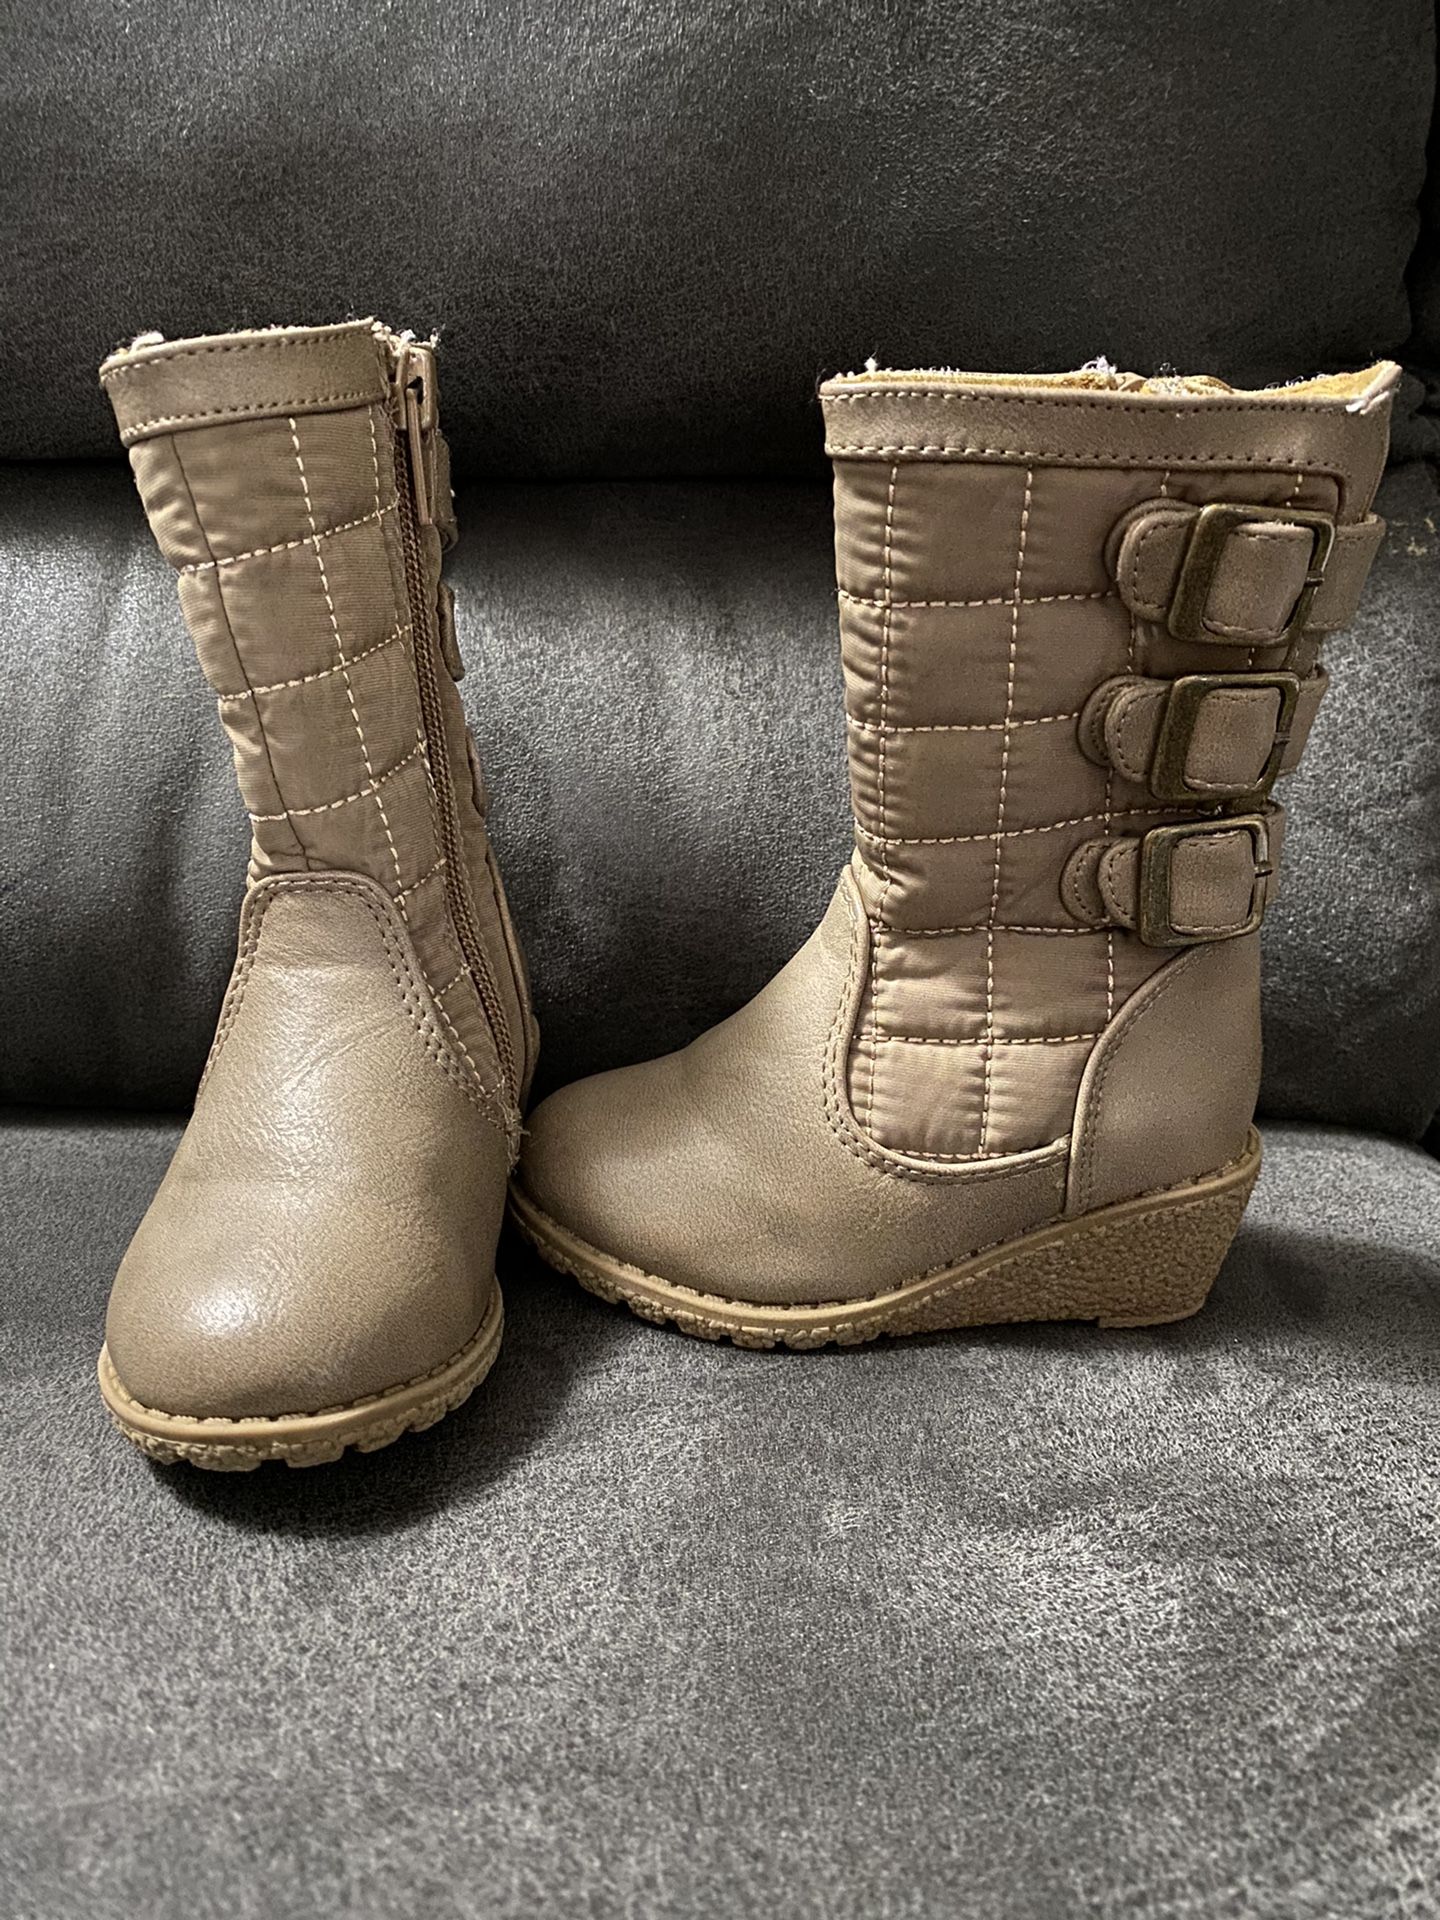 Girl Boots Size 5 